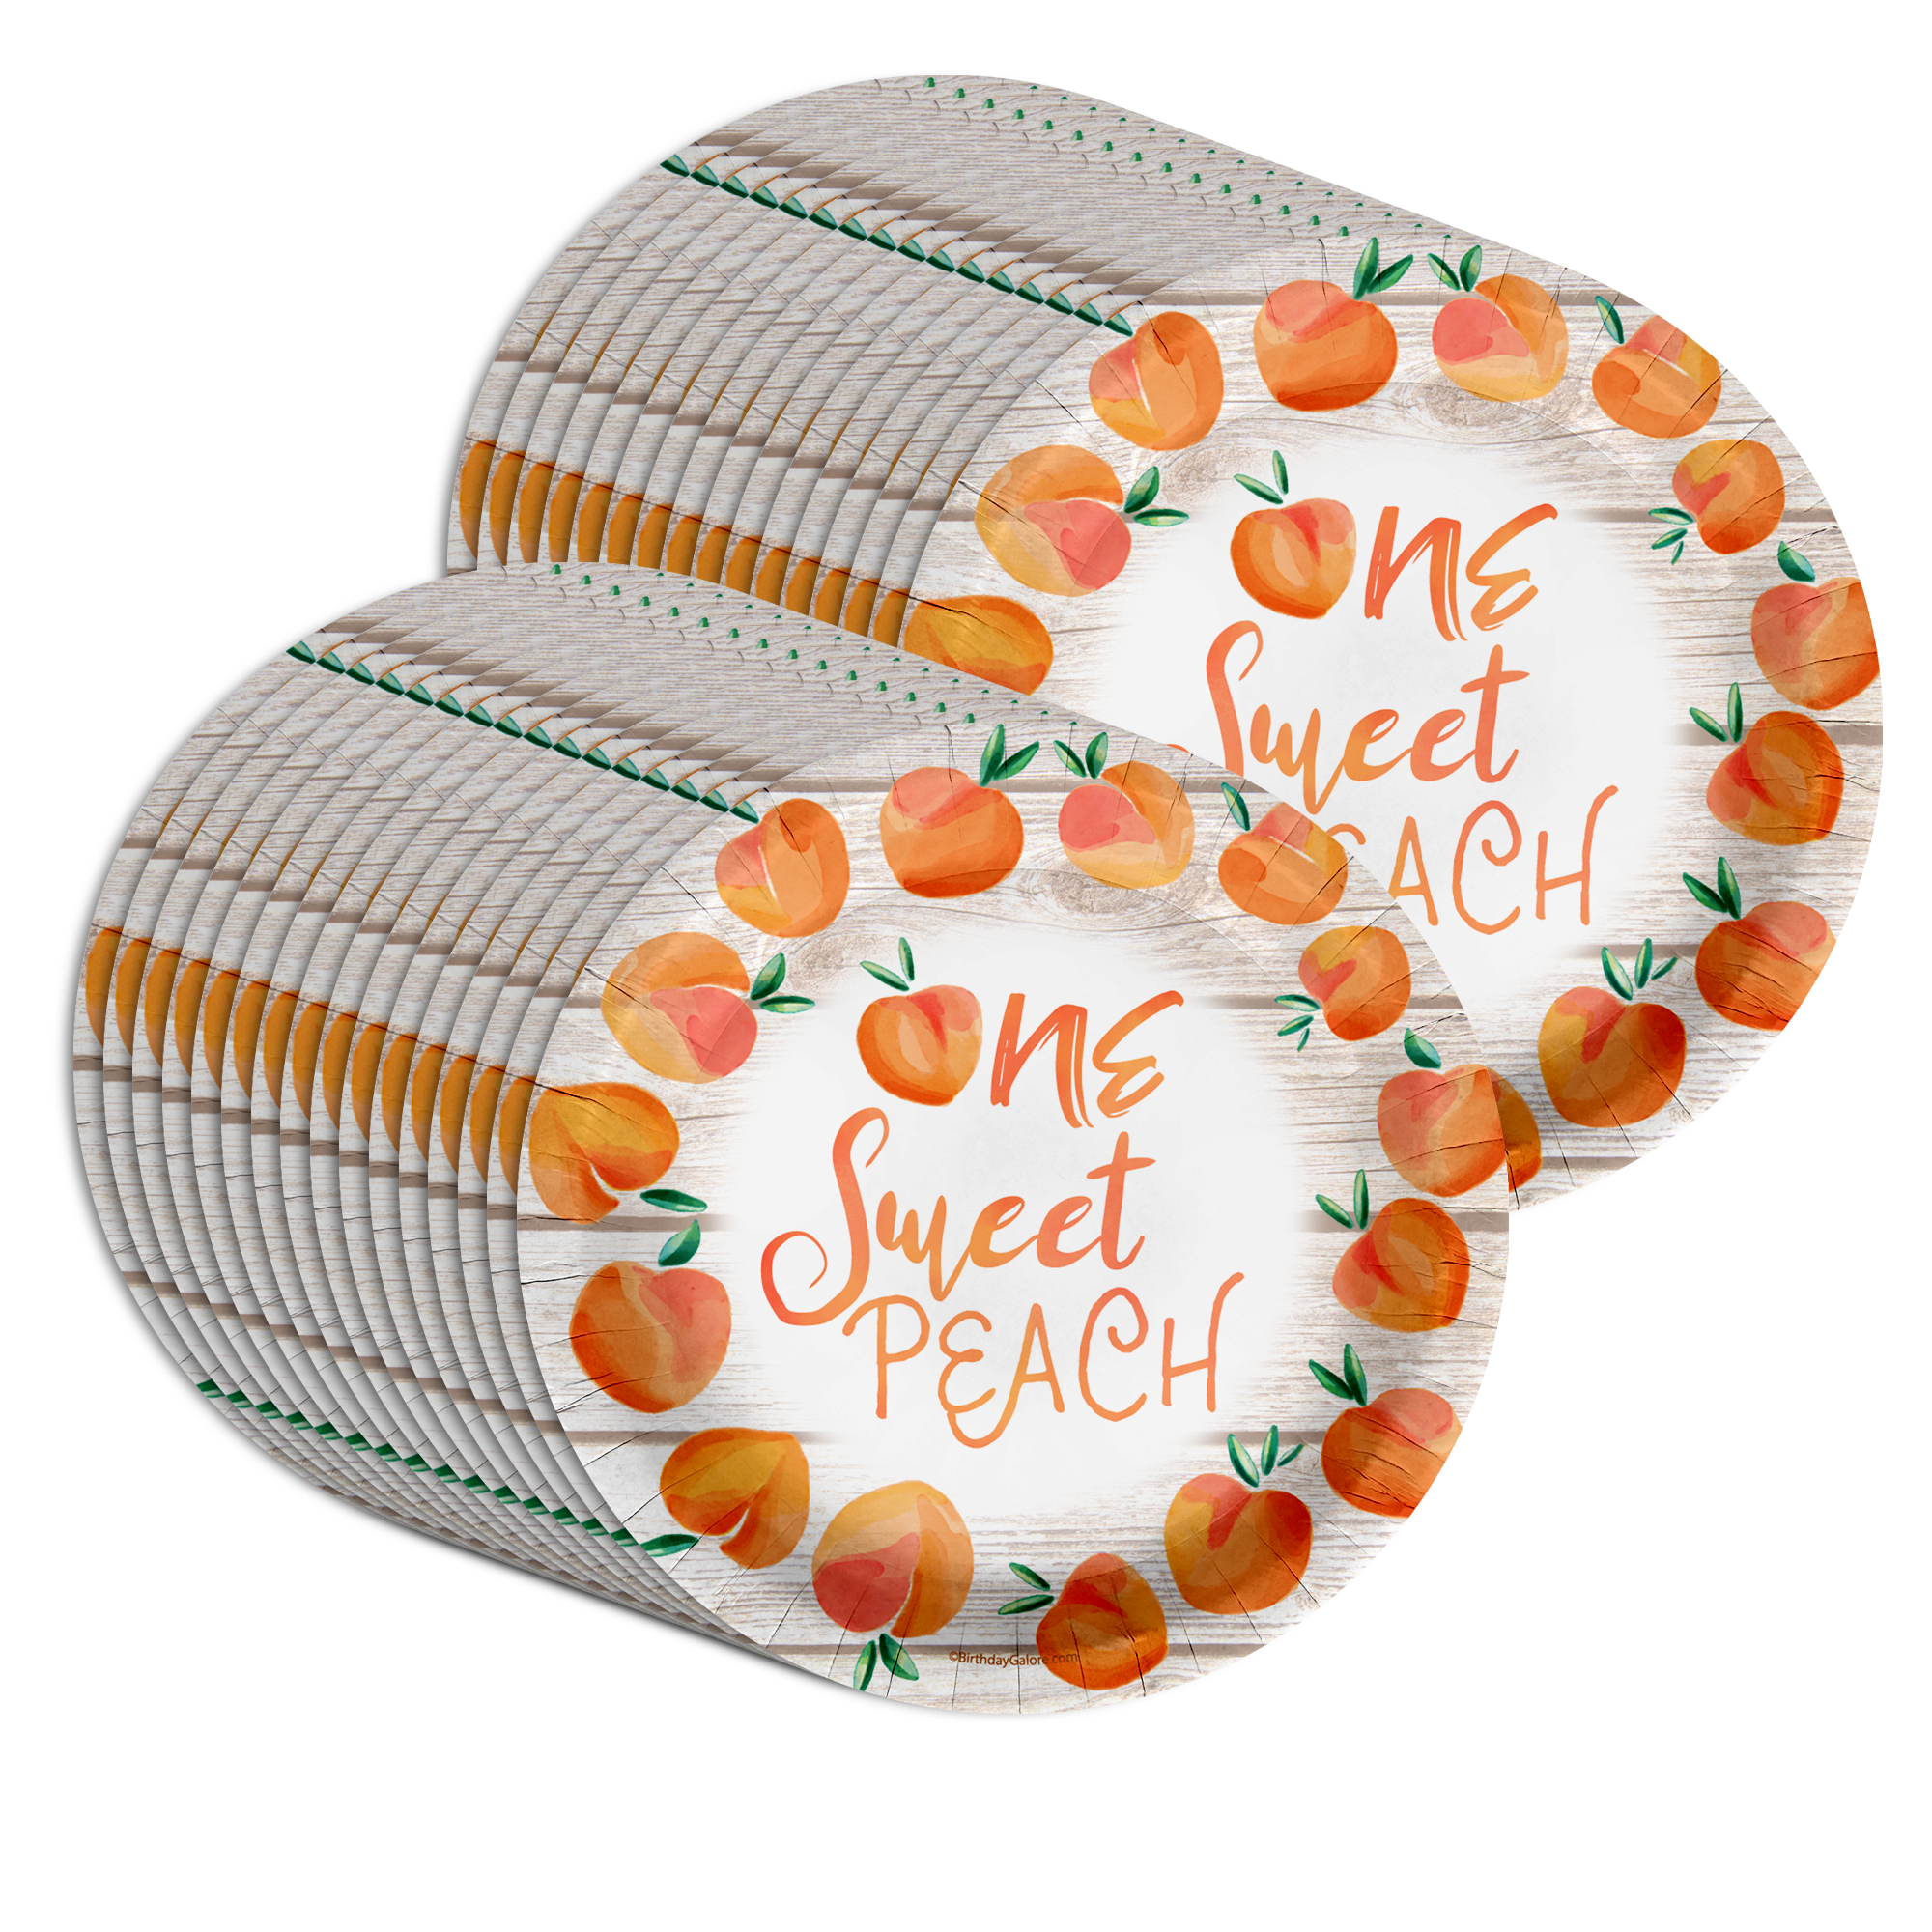 One Sweet Peach 1st Birthday Party Supplies Large 9" Paper Plates in Bulk 32 Piece